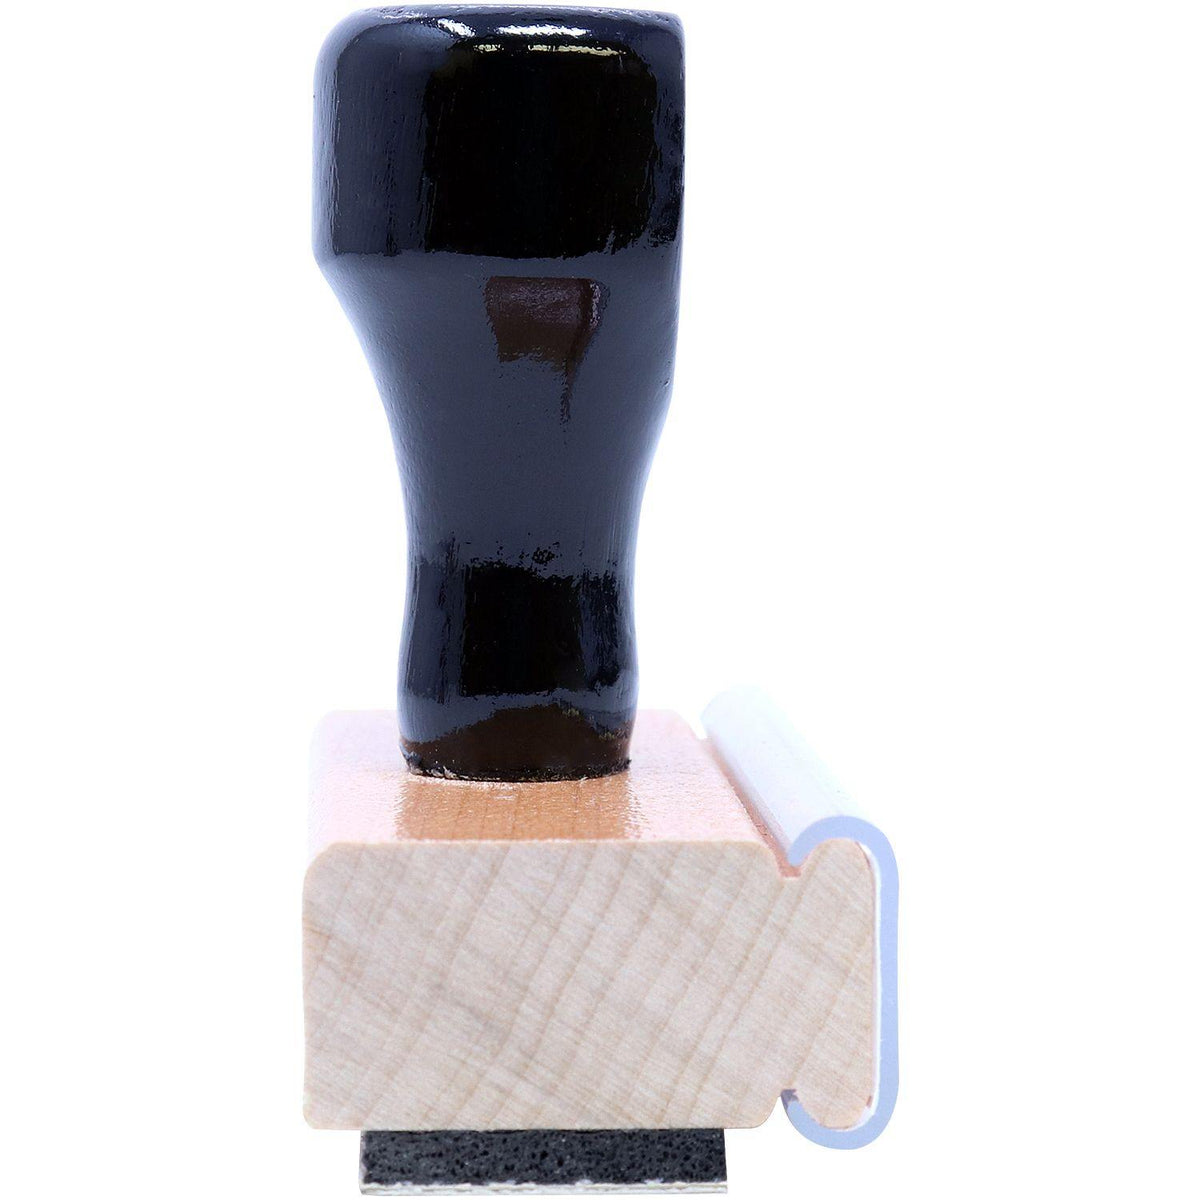 Side View of Large Please Forward Insurance Form Rubber Stamp